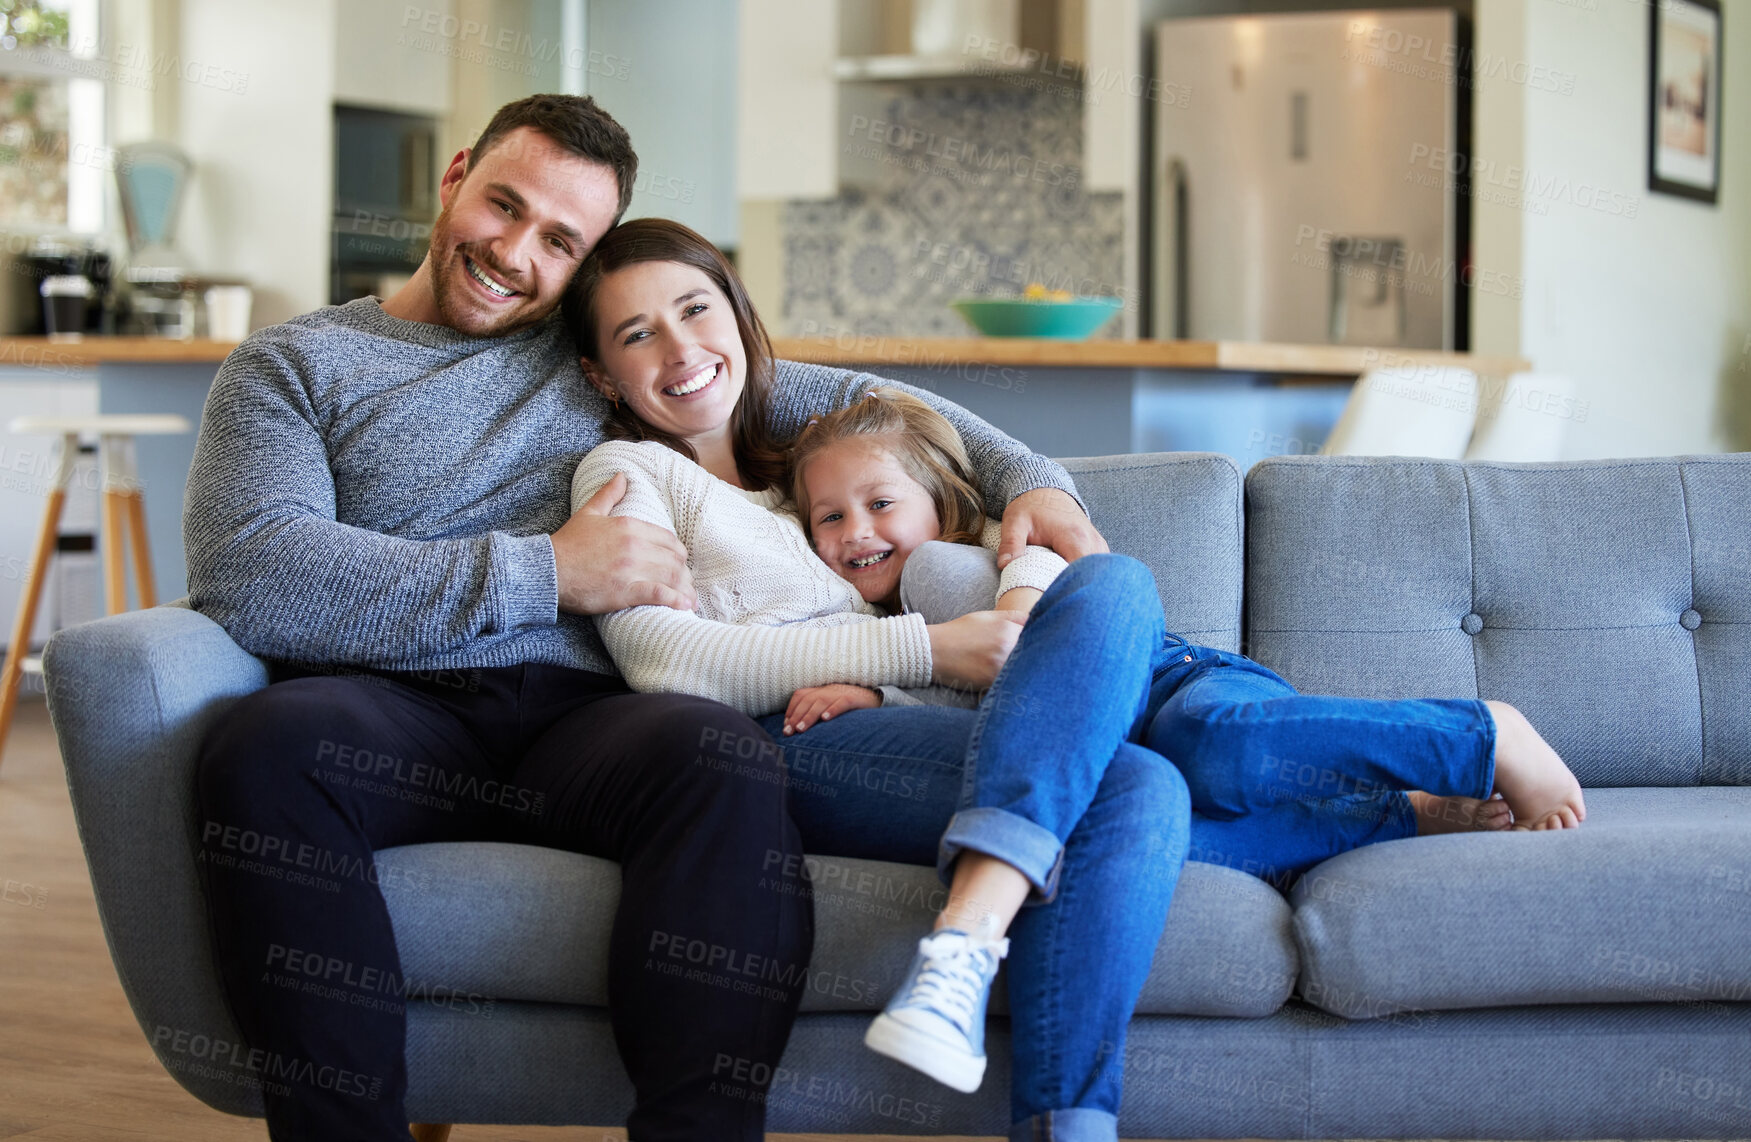 Buy stock photo Shot of a young family relaxing on the couch at home